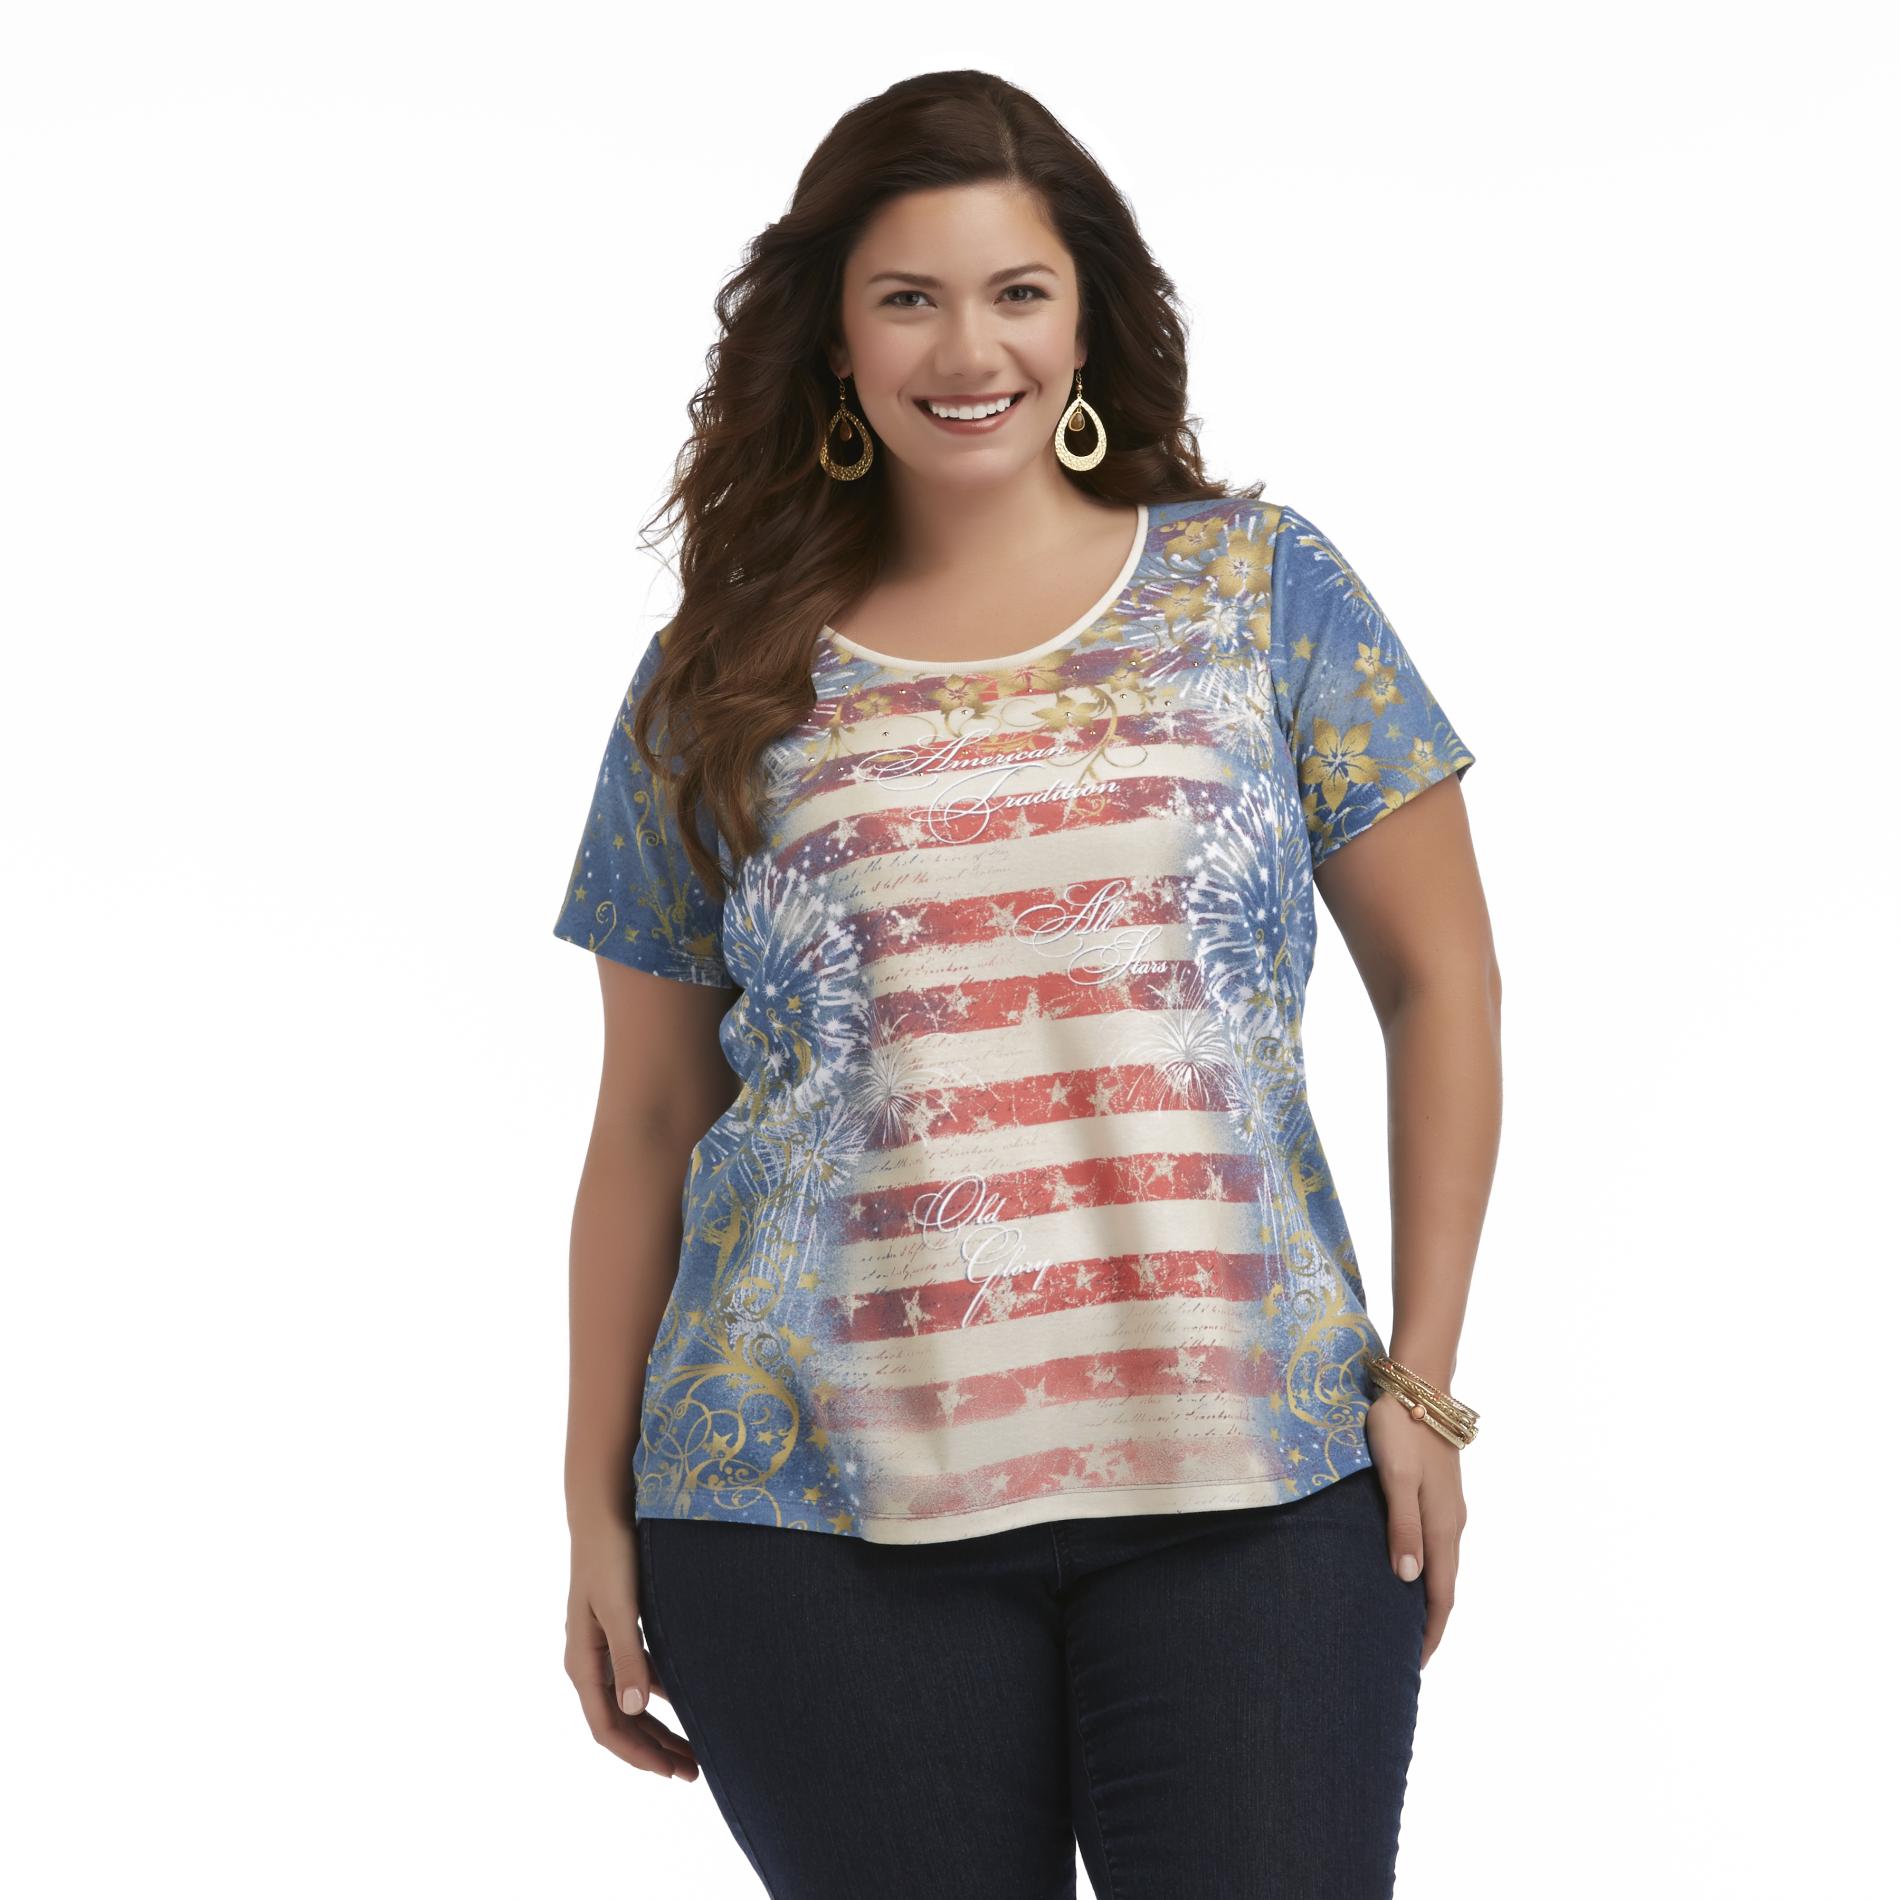 Holiday Editions Women's Plus Rhinestone Top - Fireworks & Striped